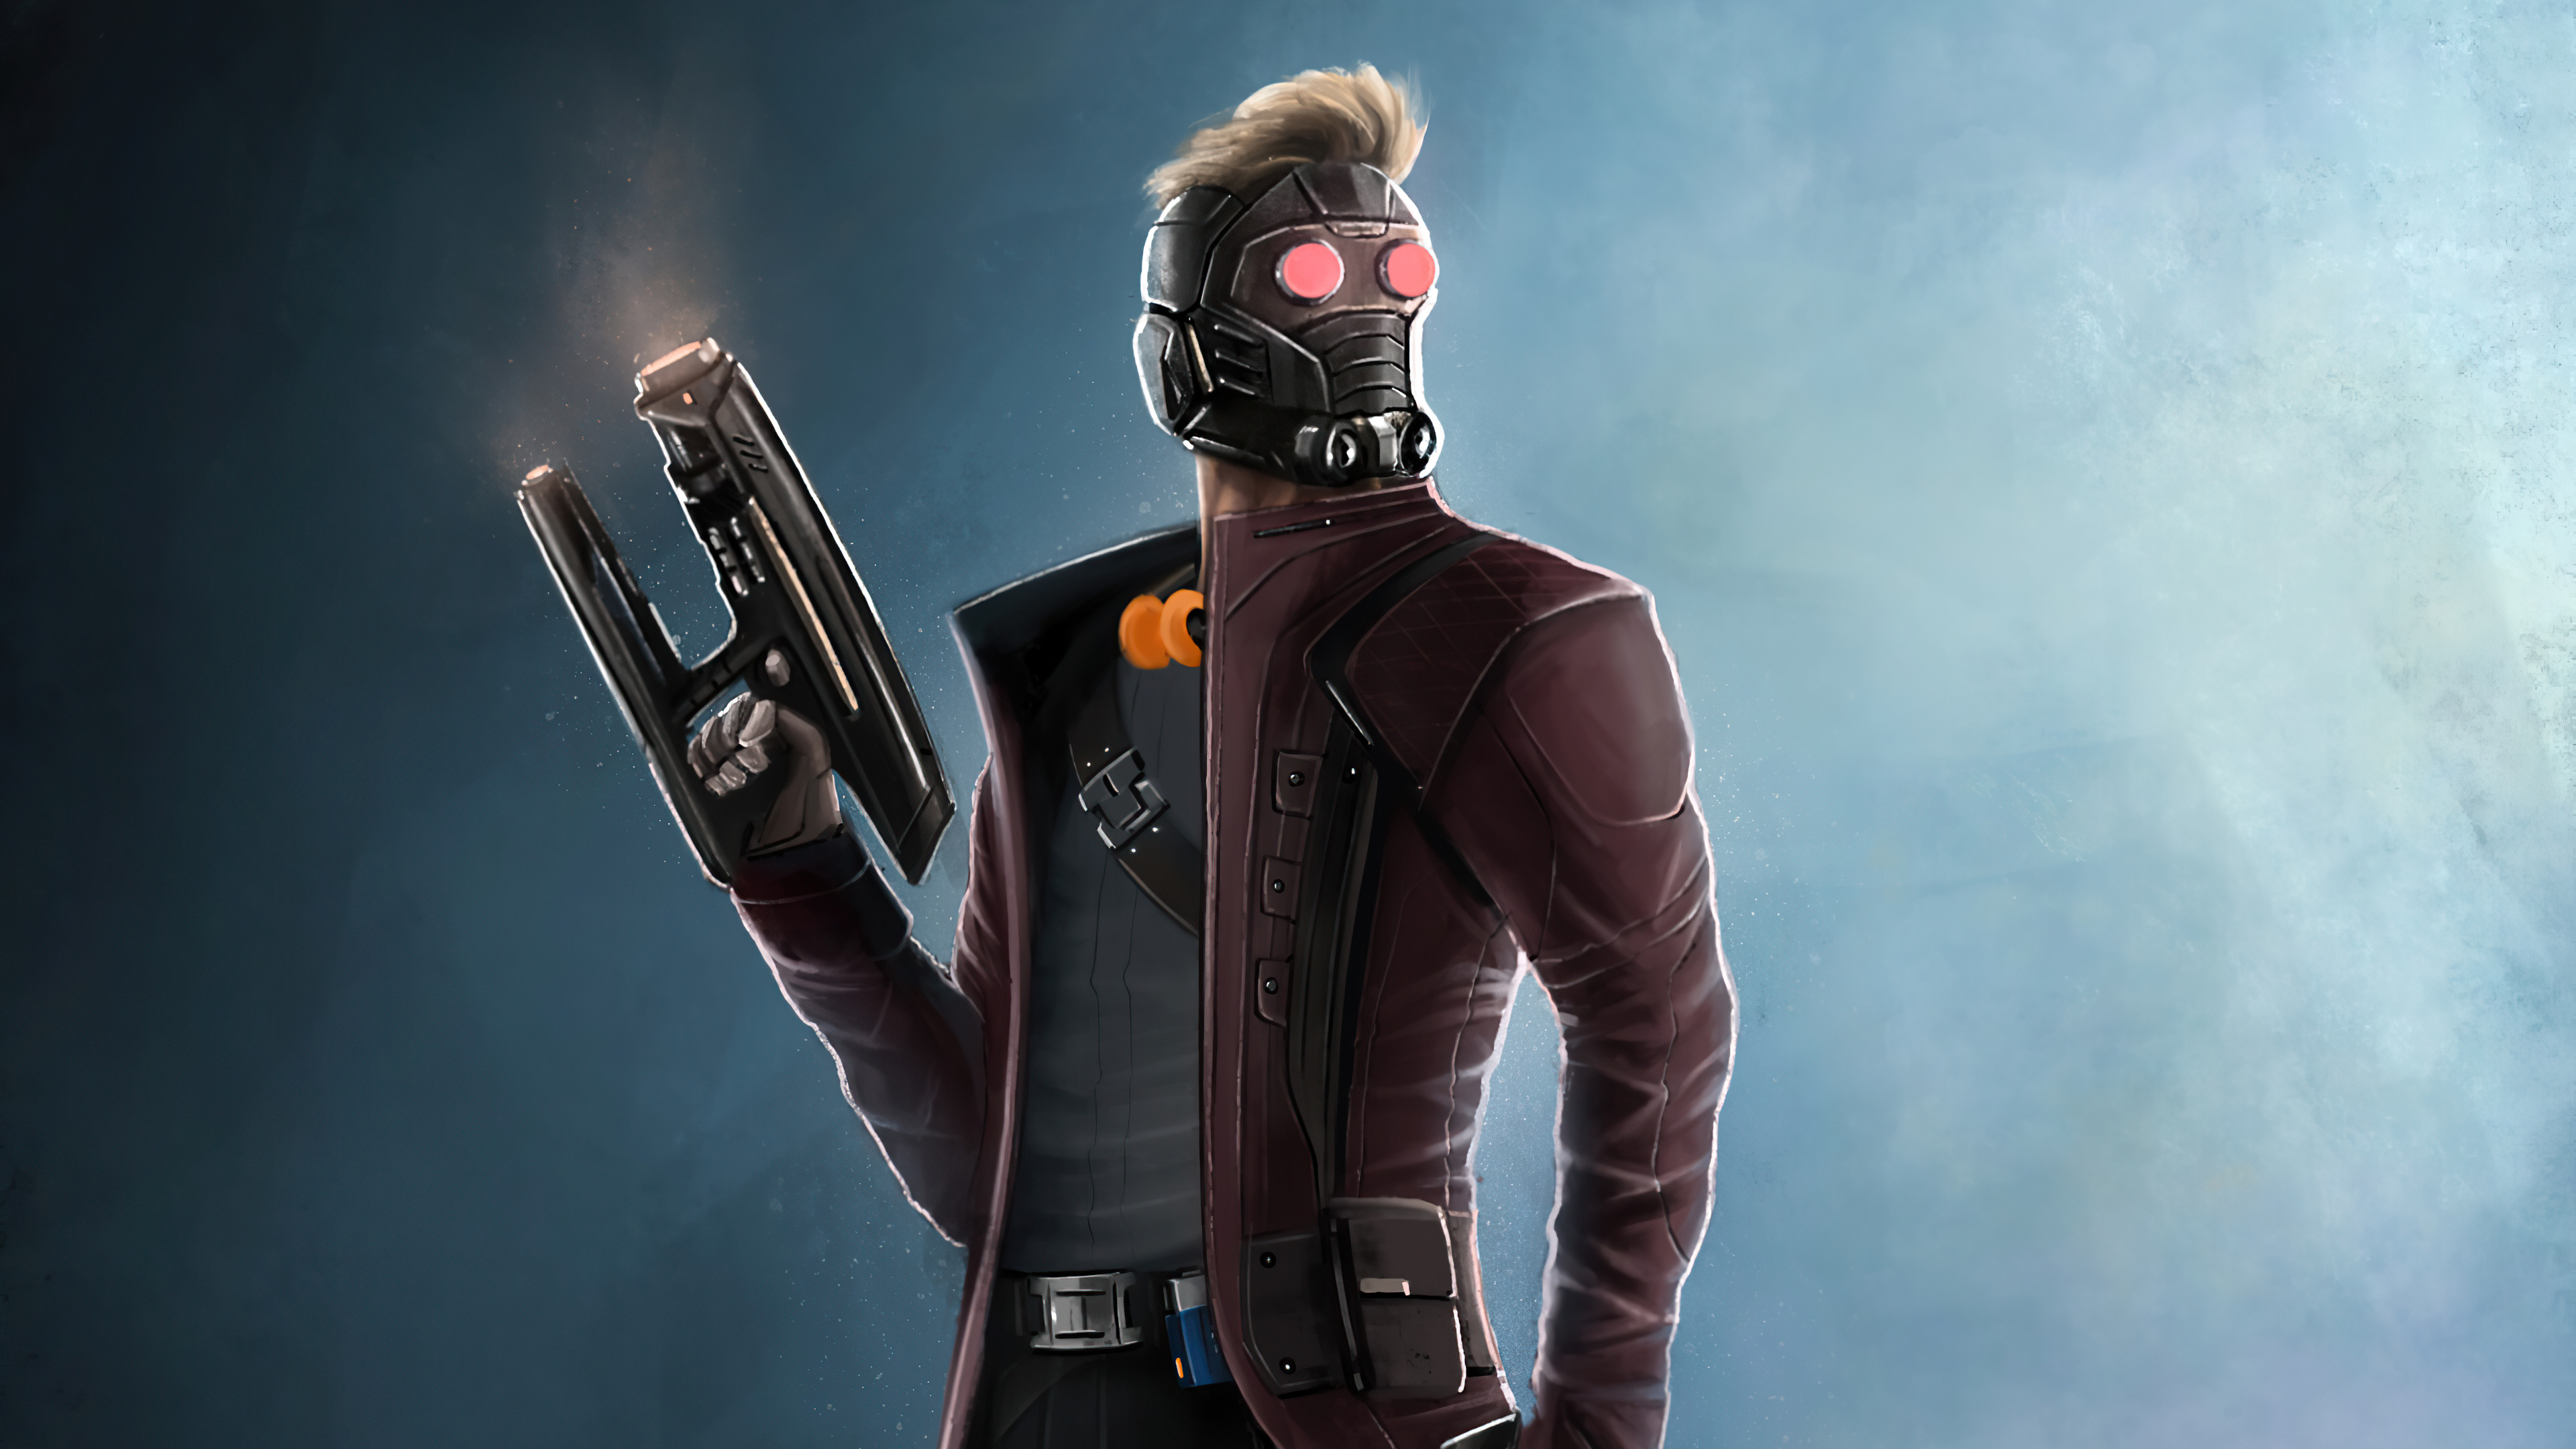 StarLord Wallpapers  HD Wallpapers  ID 24162